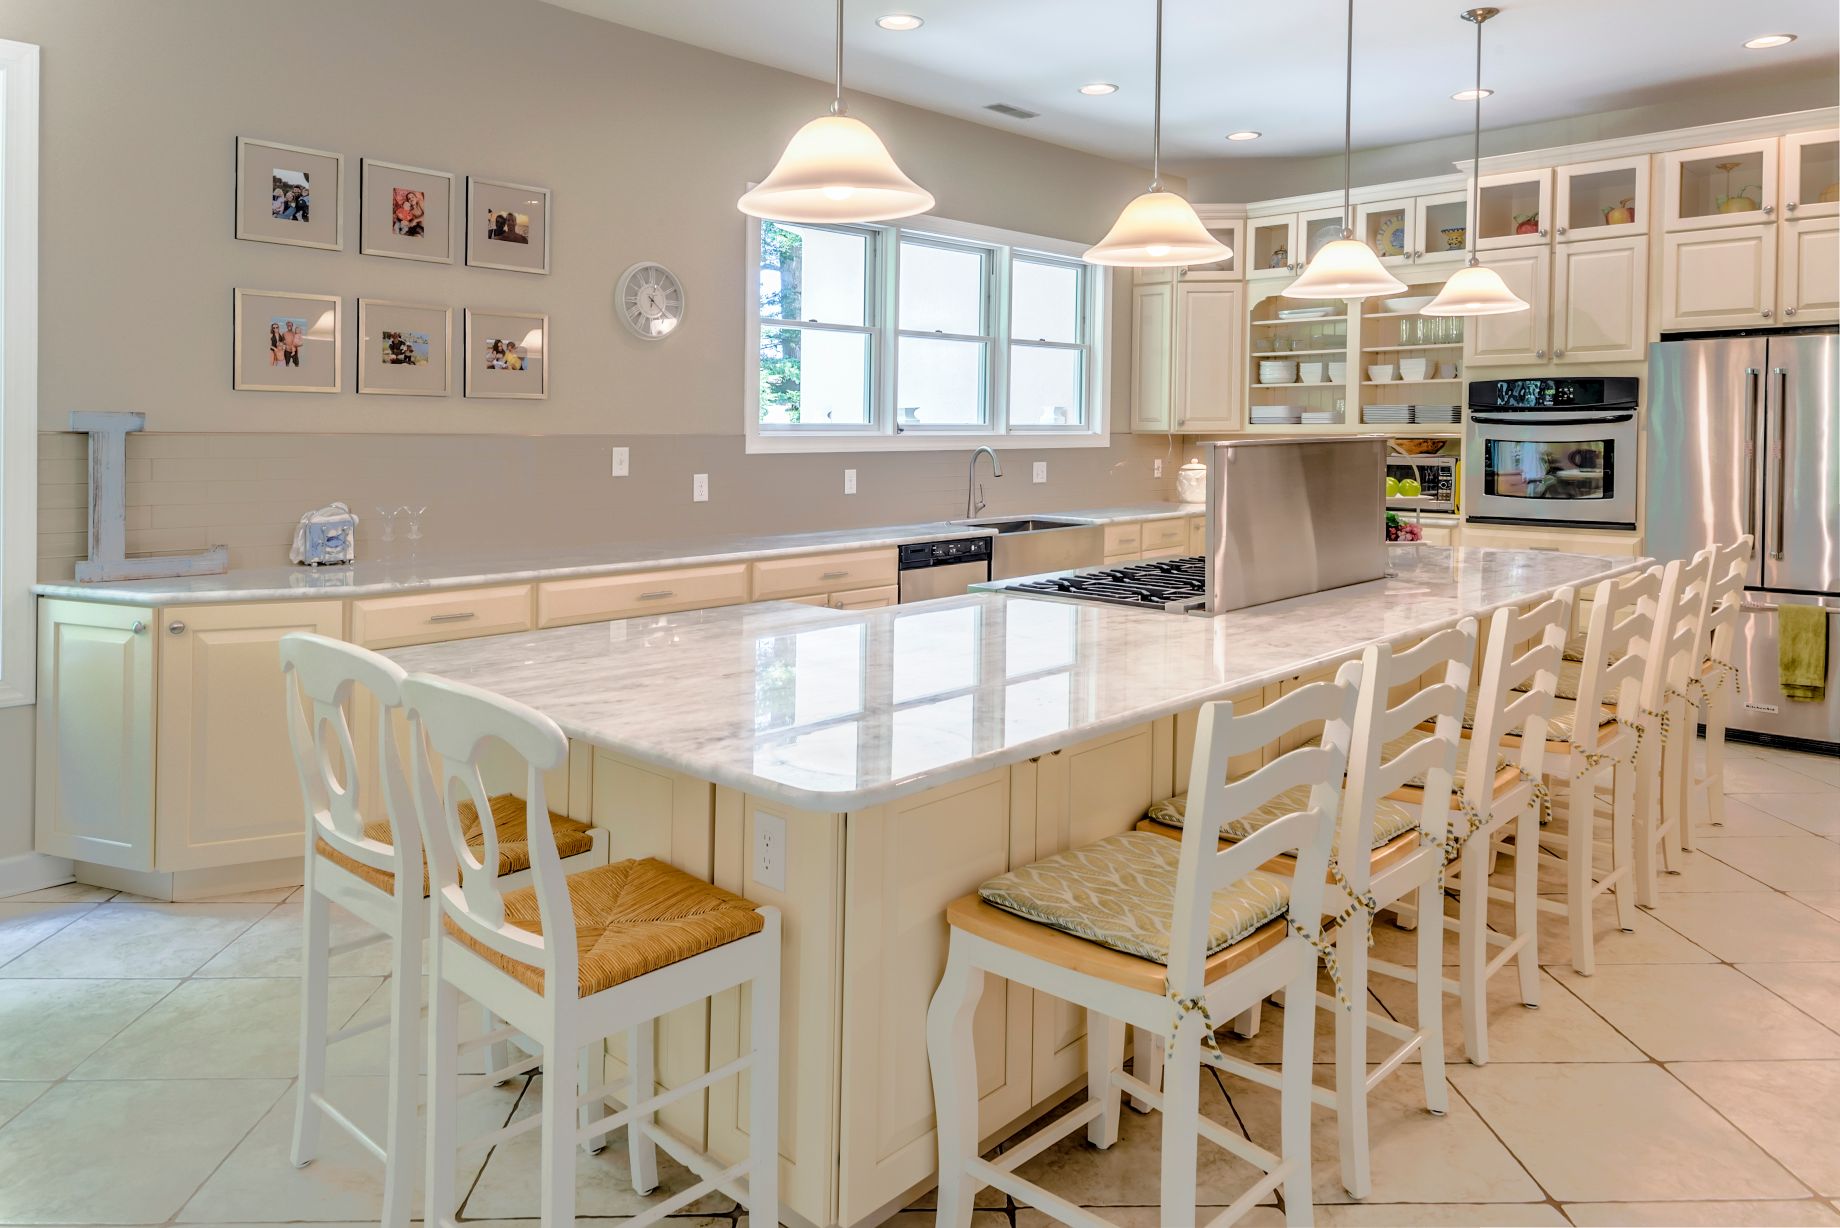 Addition in Juniper Court, Ocean Pines MD - Kitchen with Four Pendant Lights and White Chairs